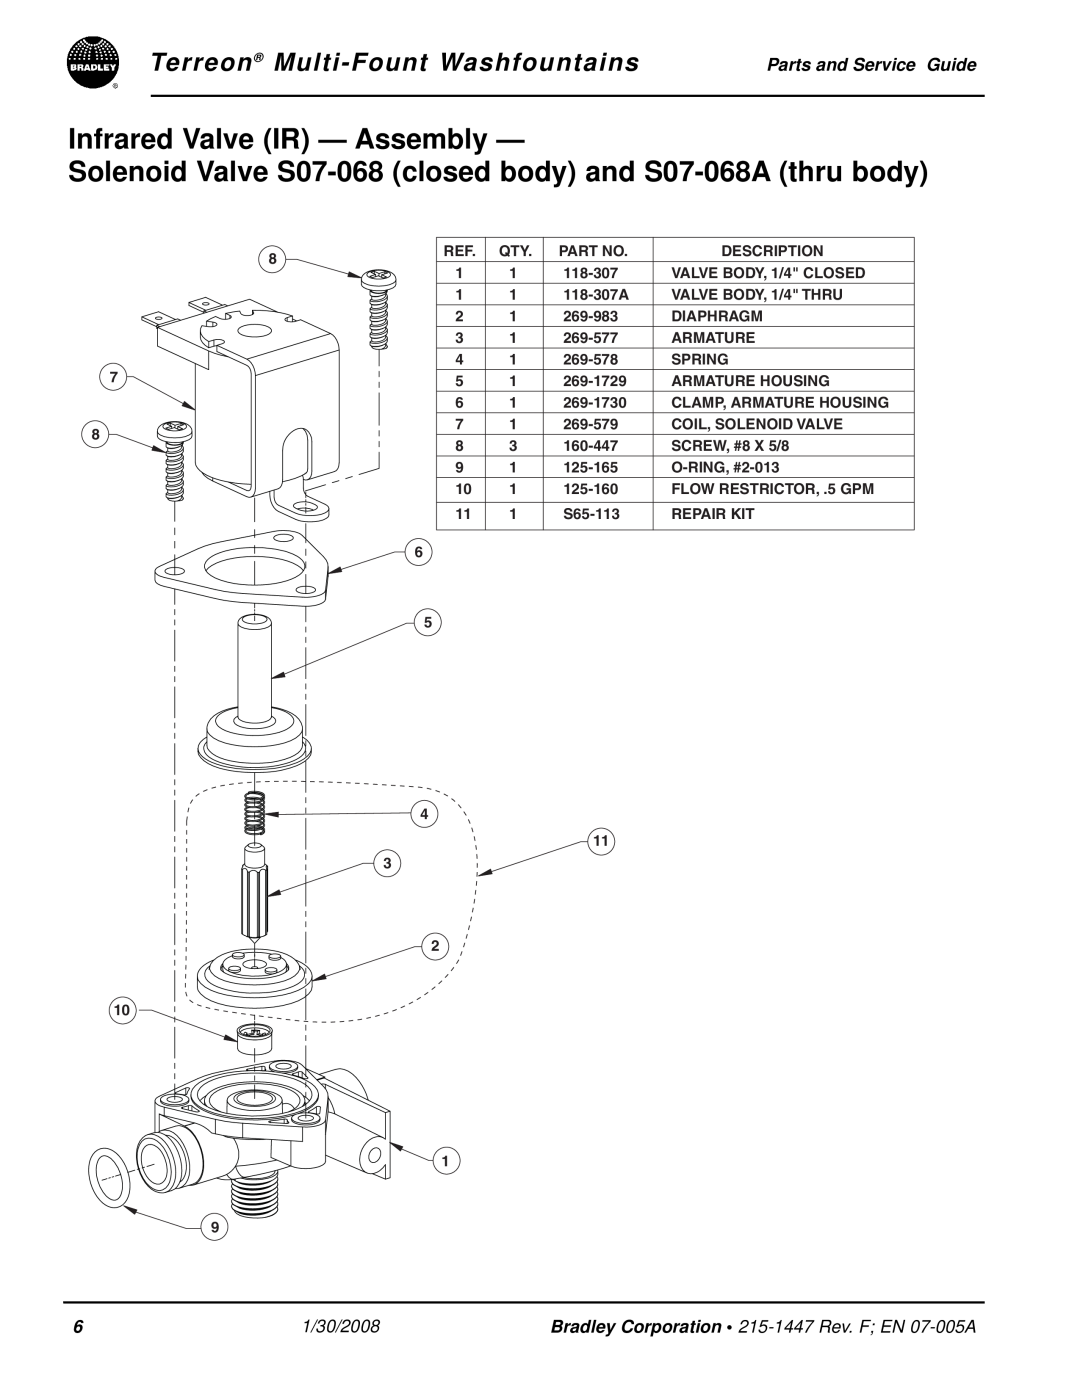 Bradley Smoker Indoor Furnishings Infrared Valve IR - Assembly, Terreon Multi-FountWashfountains, Parts and Service Guide 